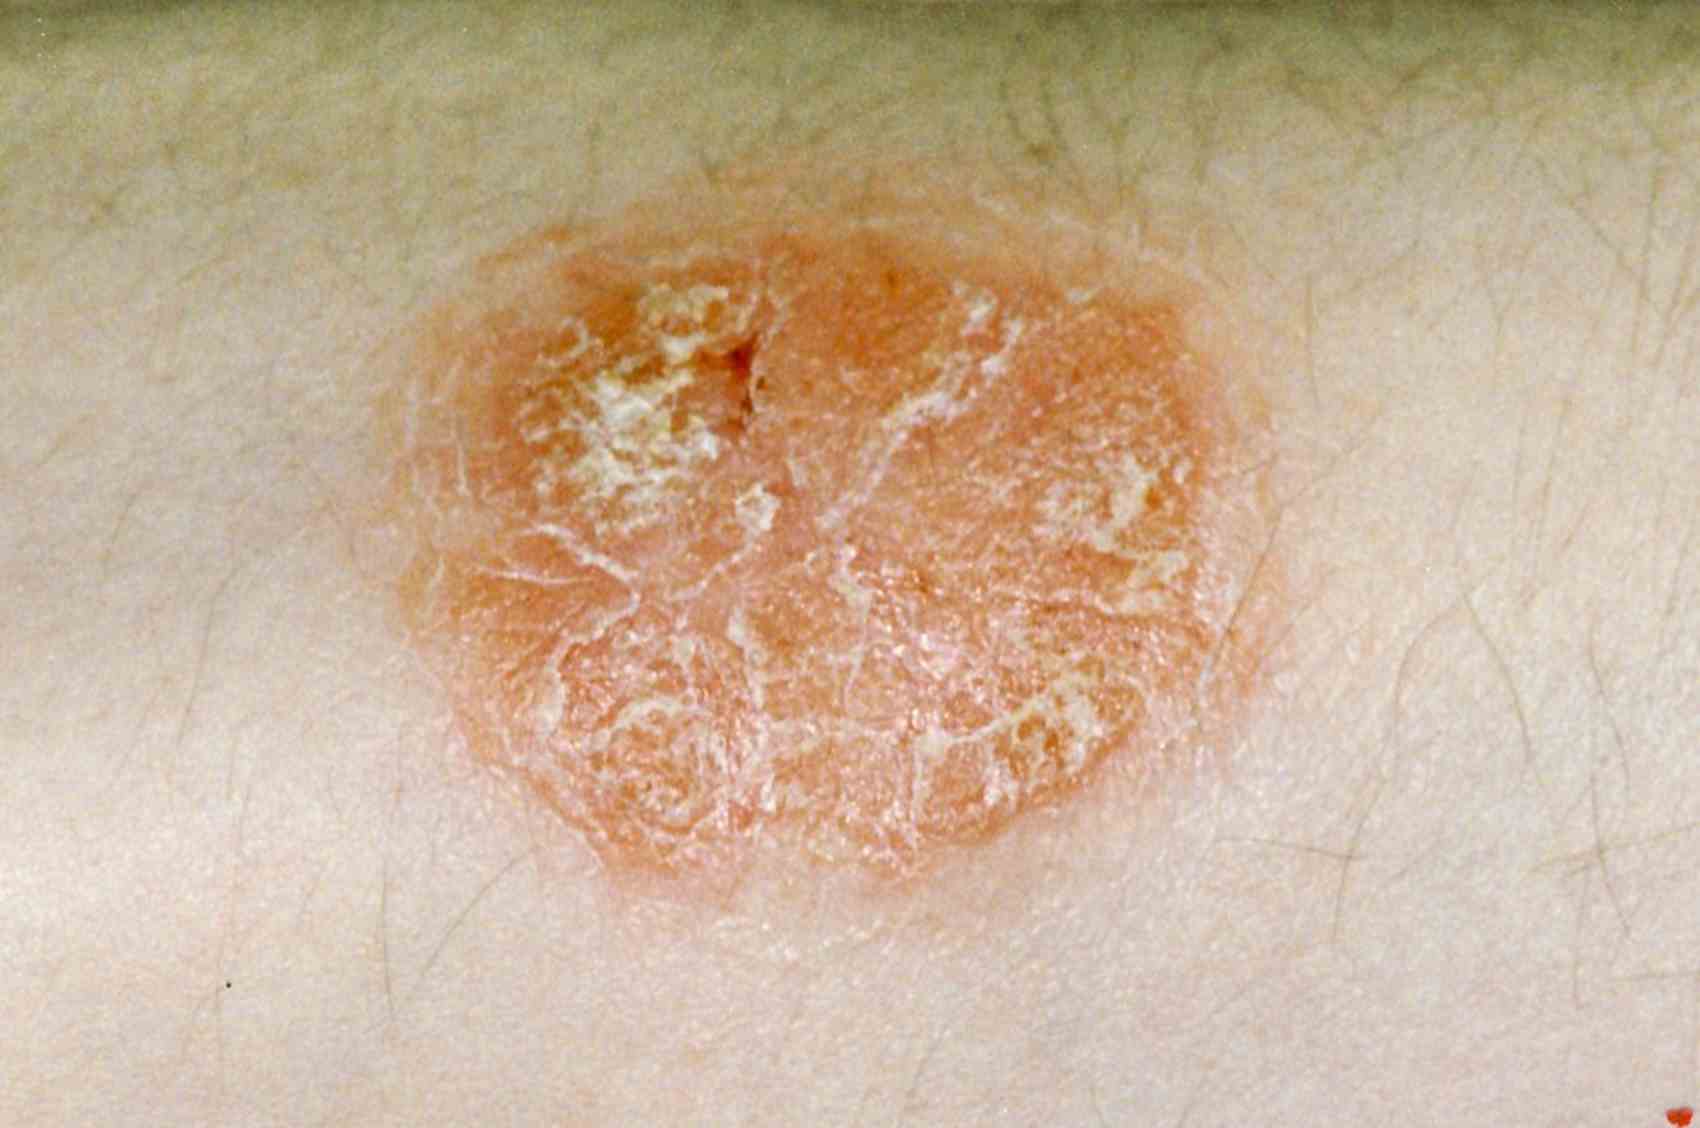 Types Of Psoriasis Who Gets It How They Are Affected And What To Expect